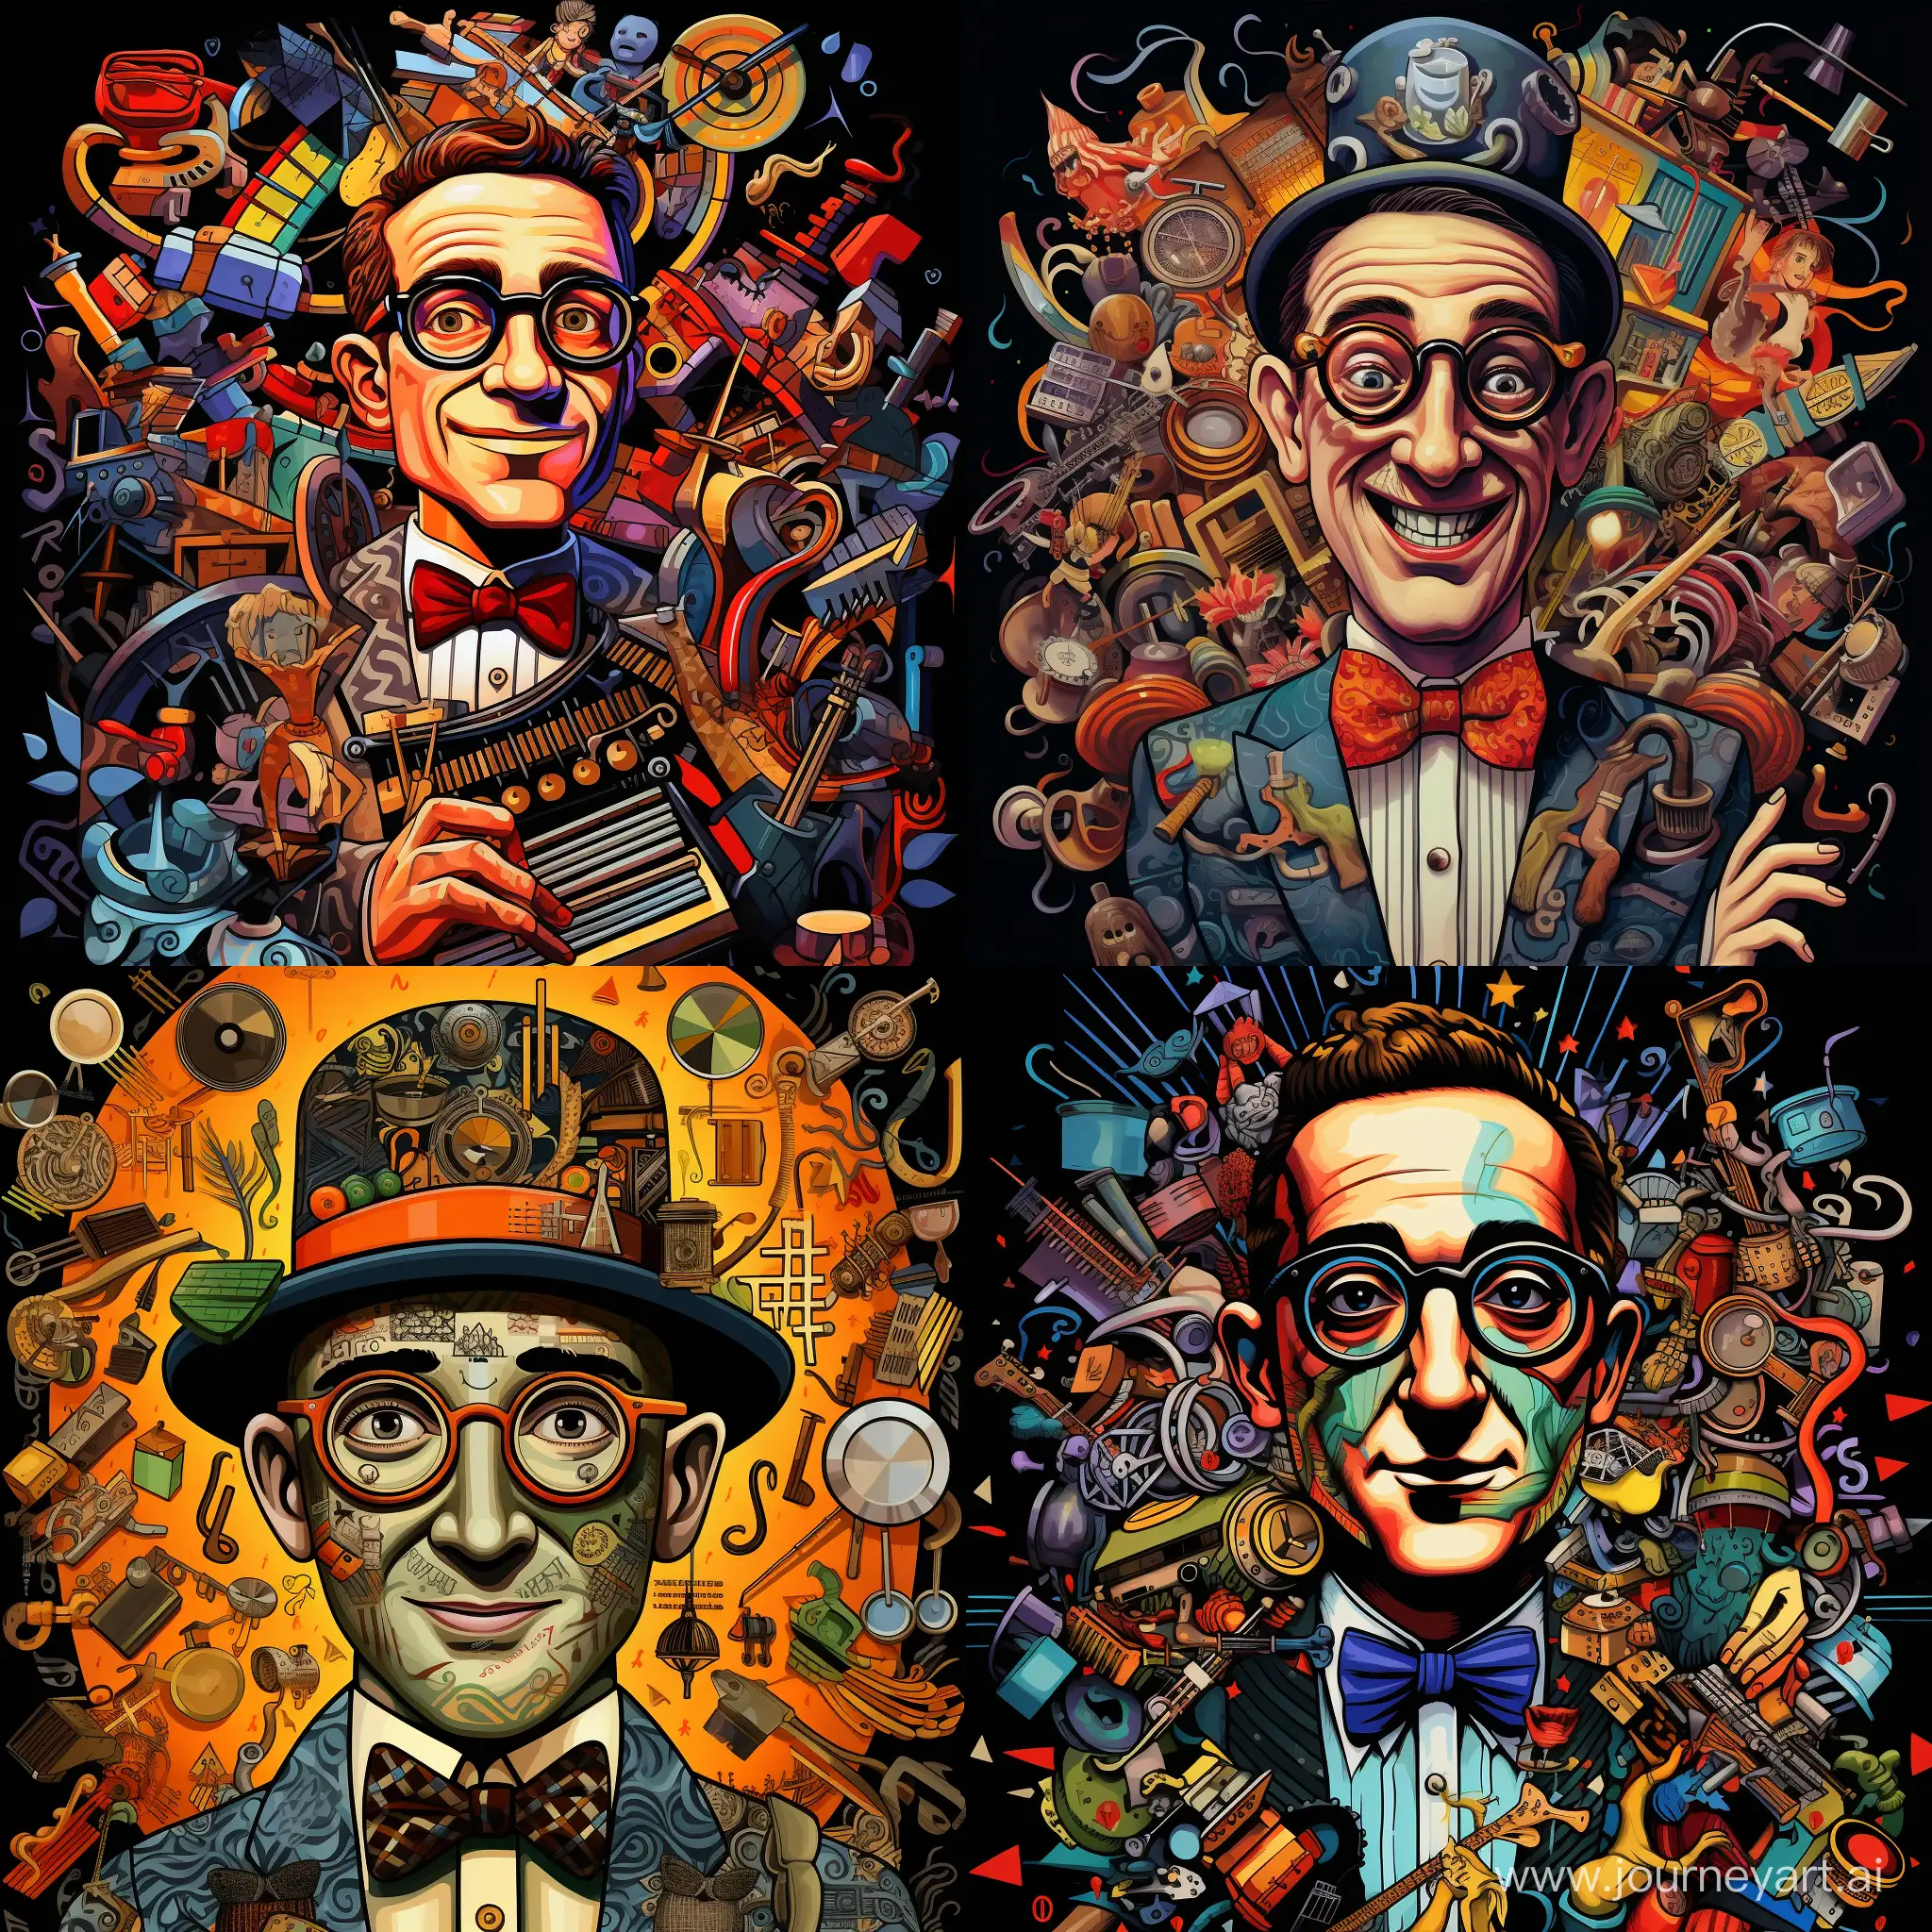 Waist portrait of  Benny Goodman,with a crown on his head, surrounded by musical symbols, lots of details, complex colors, caricature, pop art style